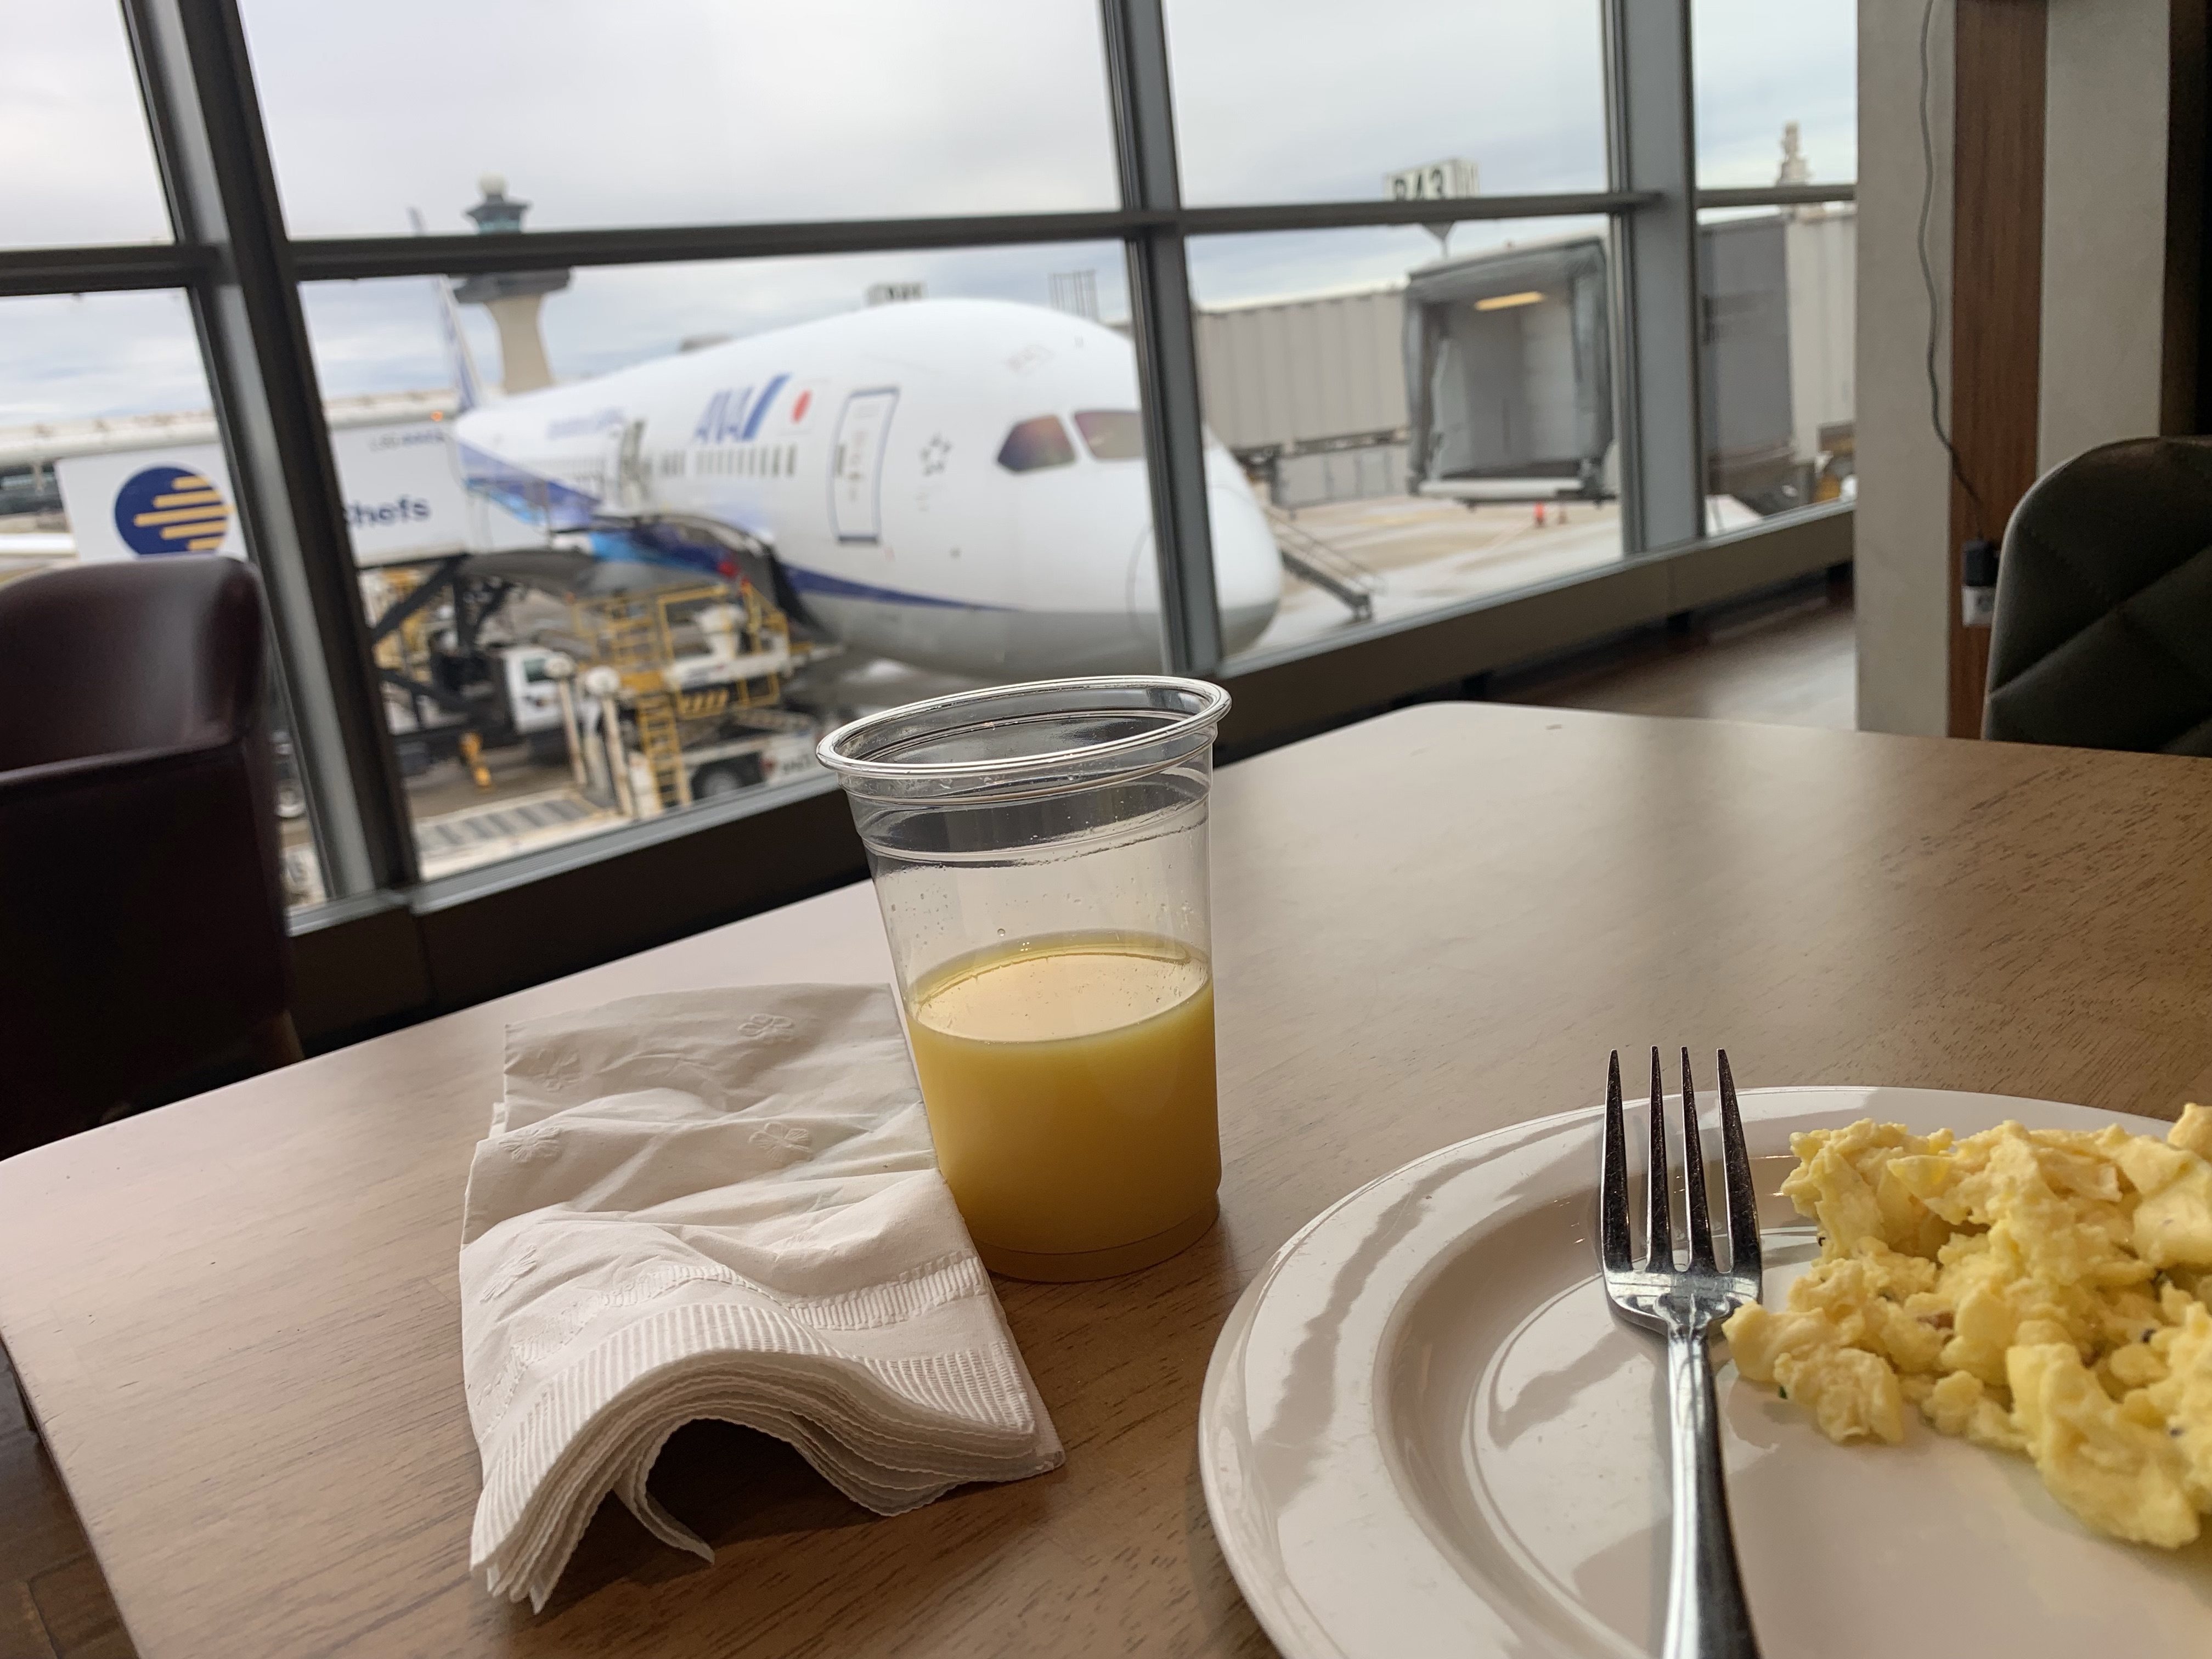 Airport Lounge breakfast with a view I MemorableWomensTravel.com